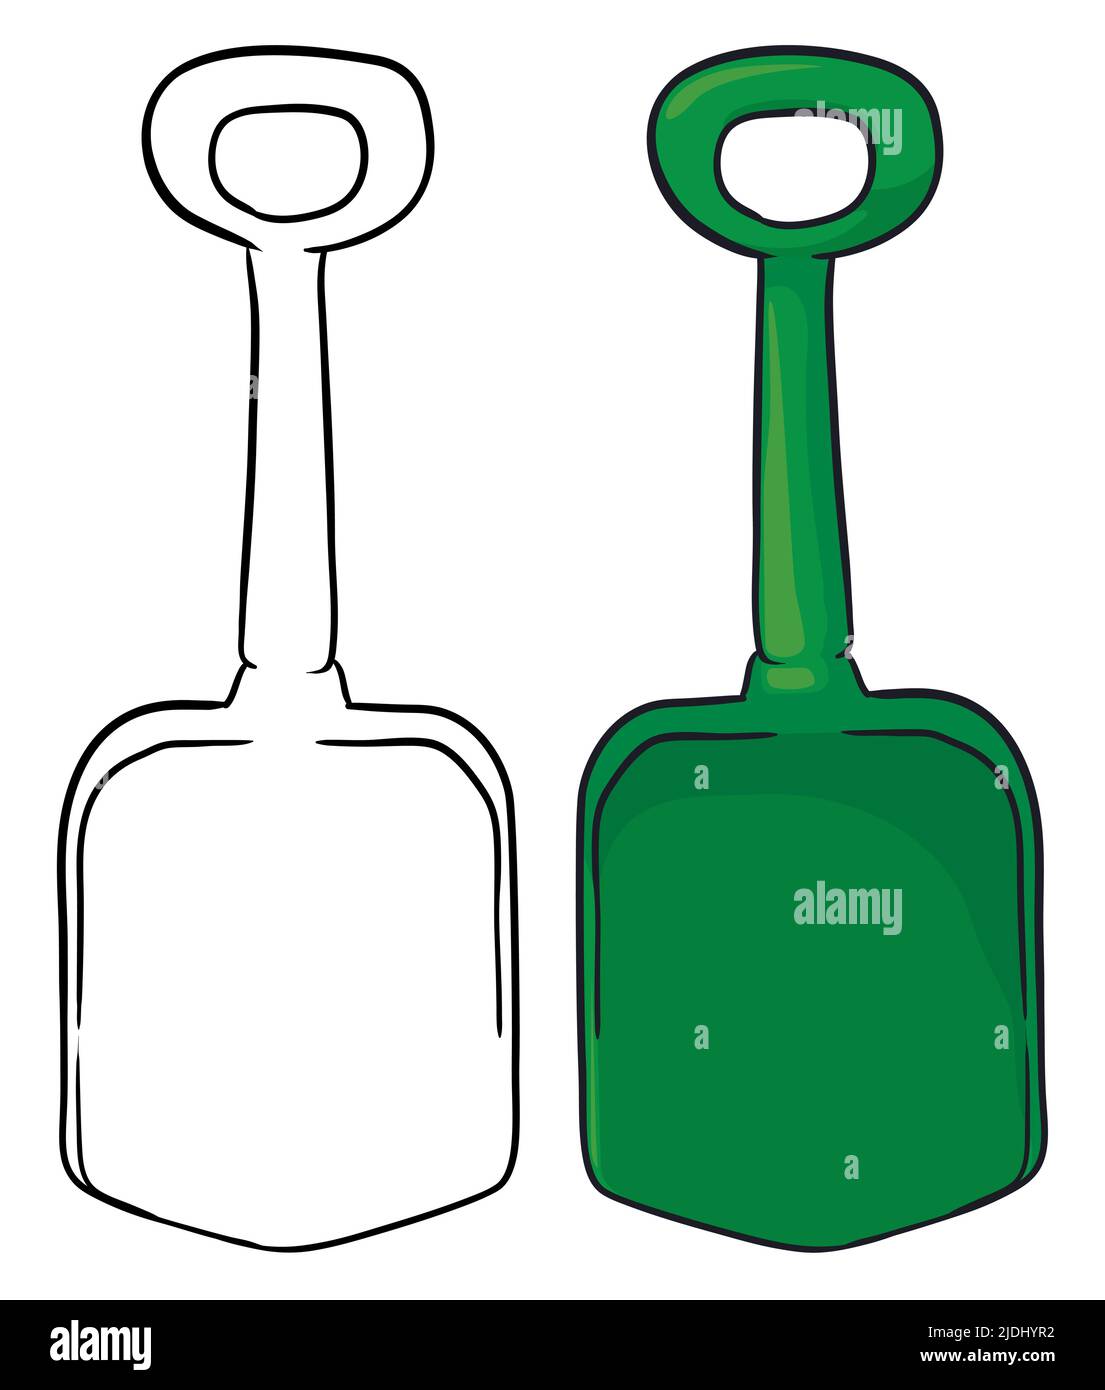 Set with shovels, one colorless in outlines ready to color it, and the other green colored in cartoon style. Stock Vector